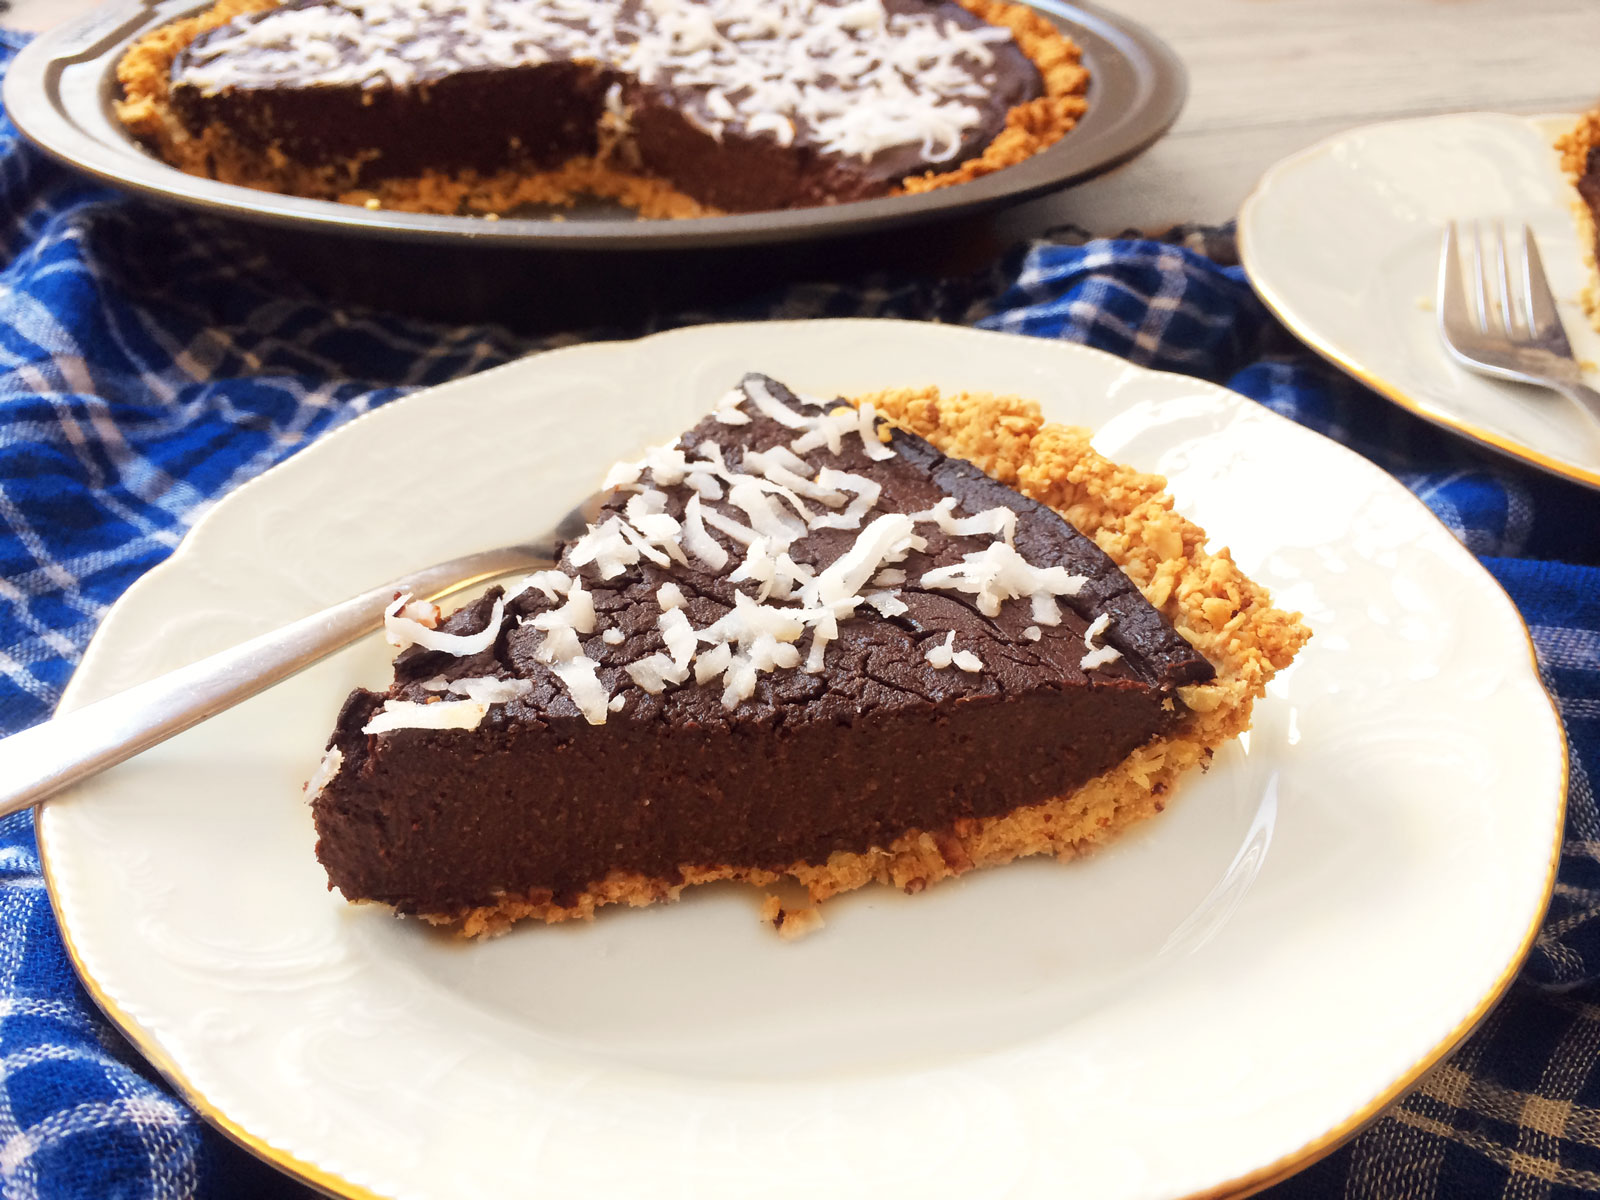 Chocolate Coconut Pie with Peanut Butter and Oats Crust